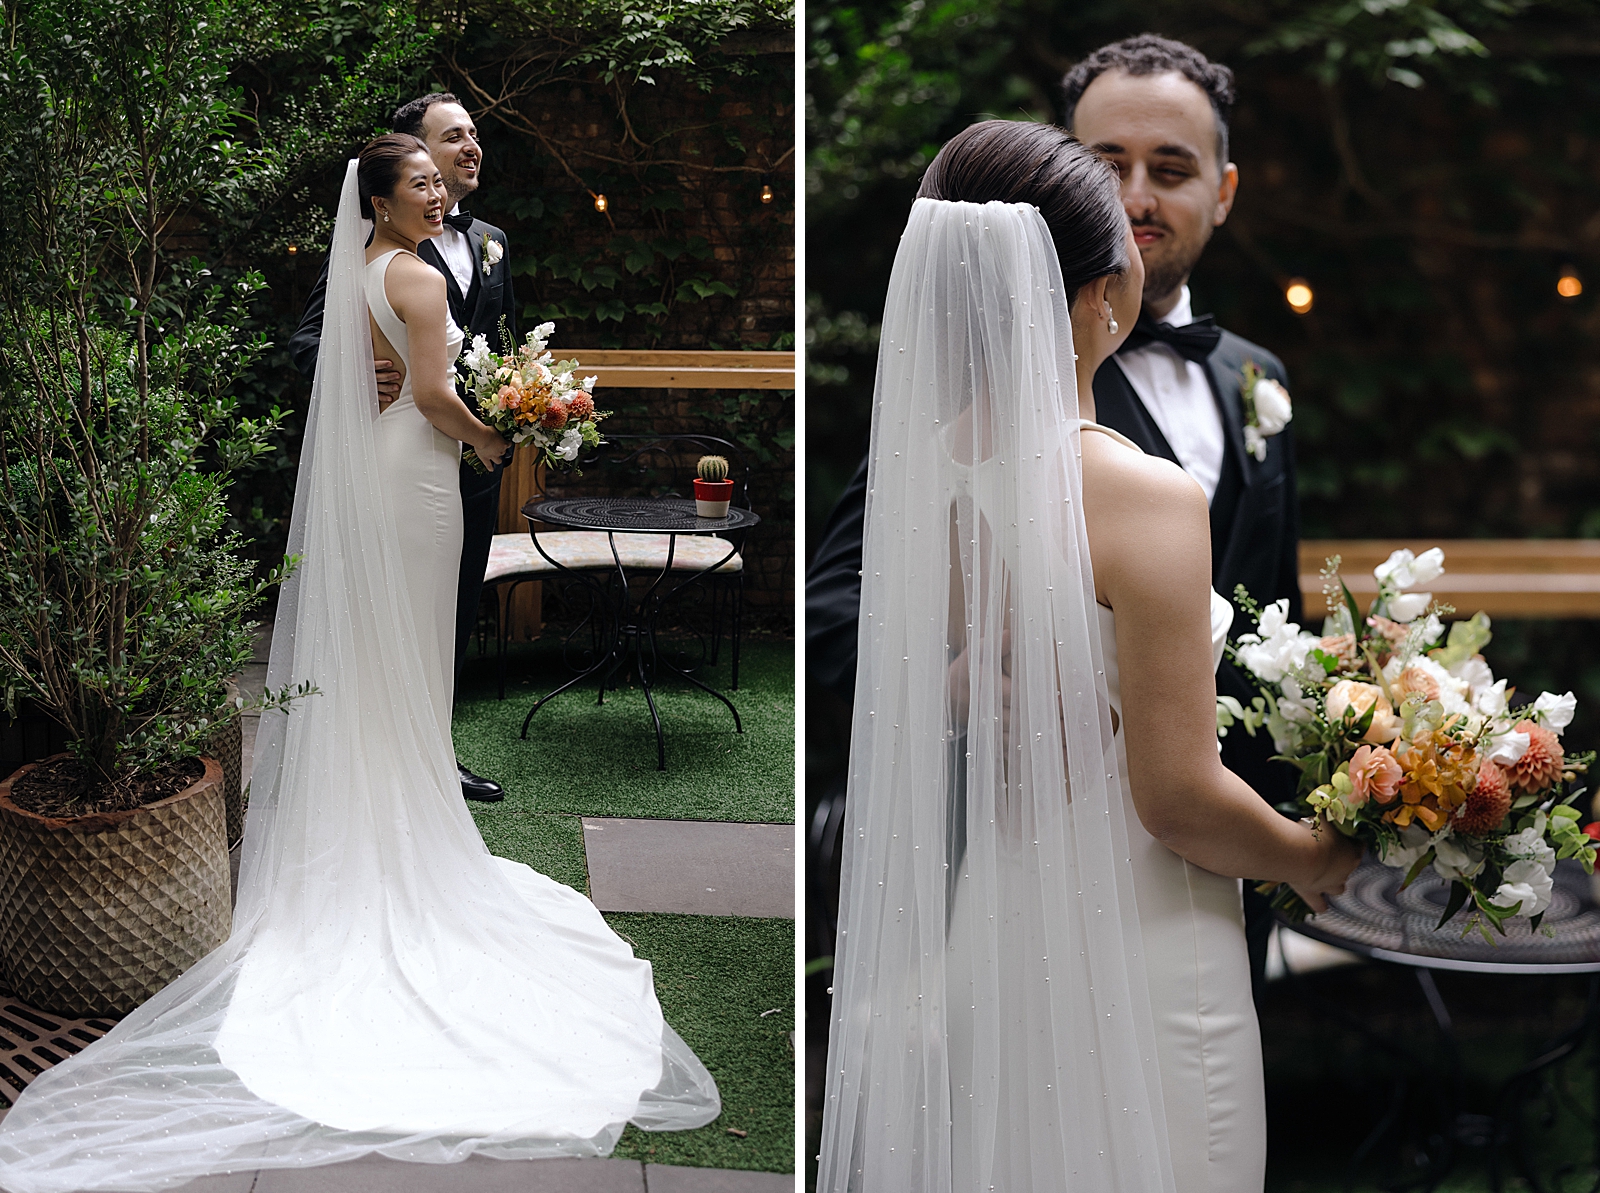 Left photo: Side shot of the bride and groom smiling. 
Right photo: Shot of the groom smiling down at the bride. 